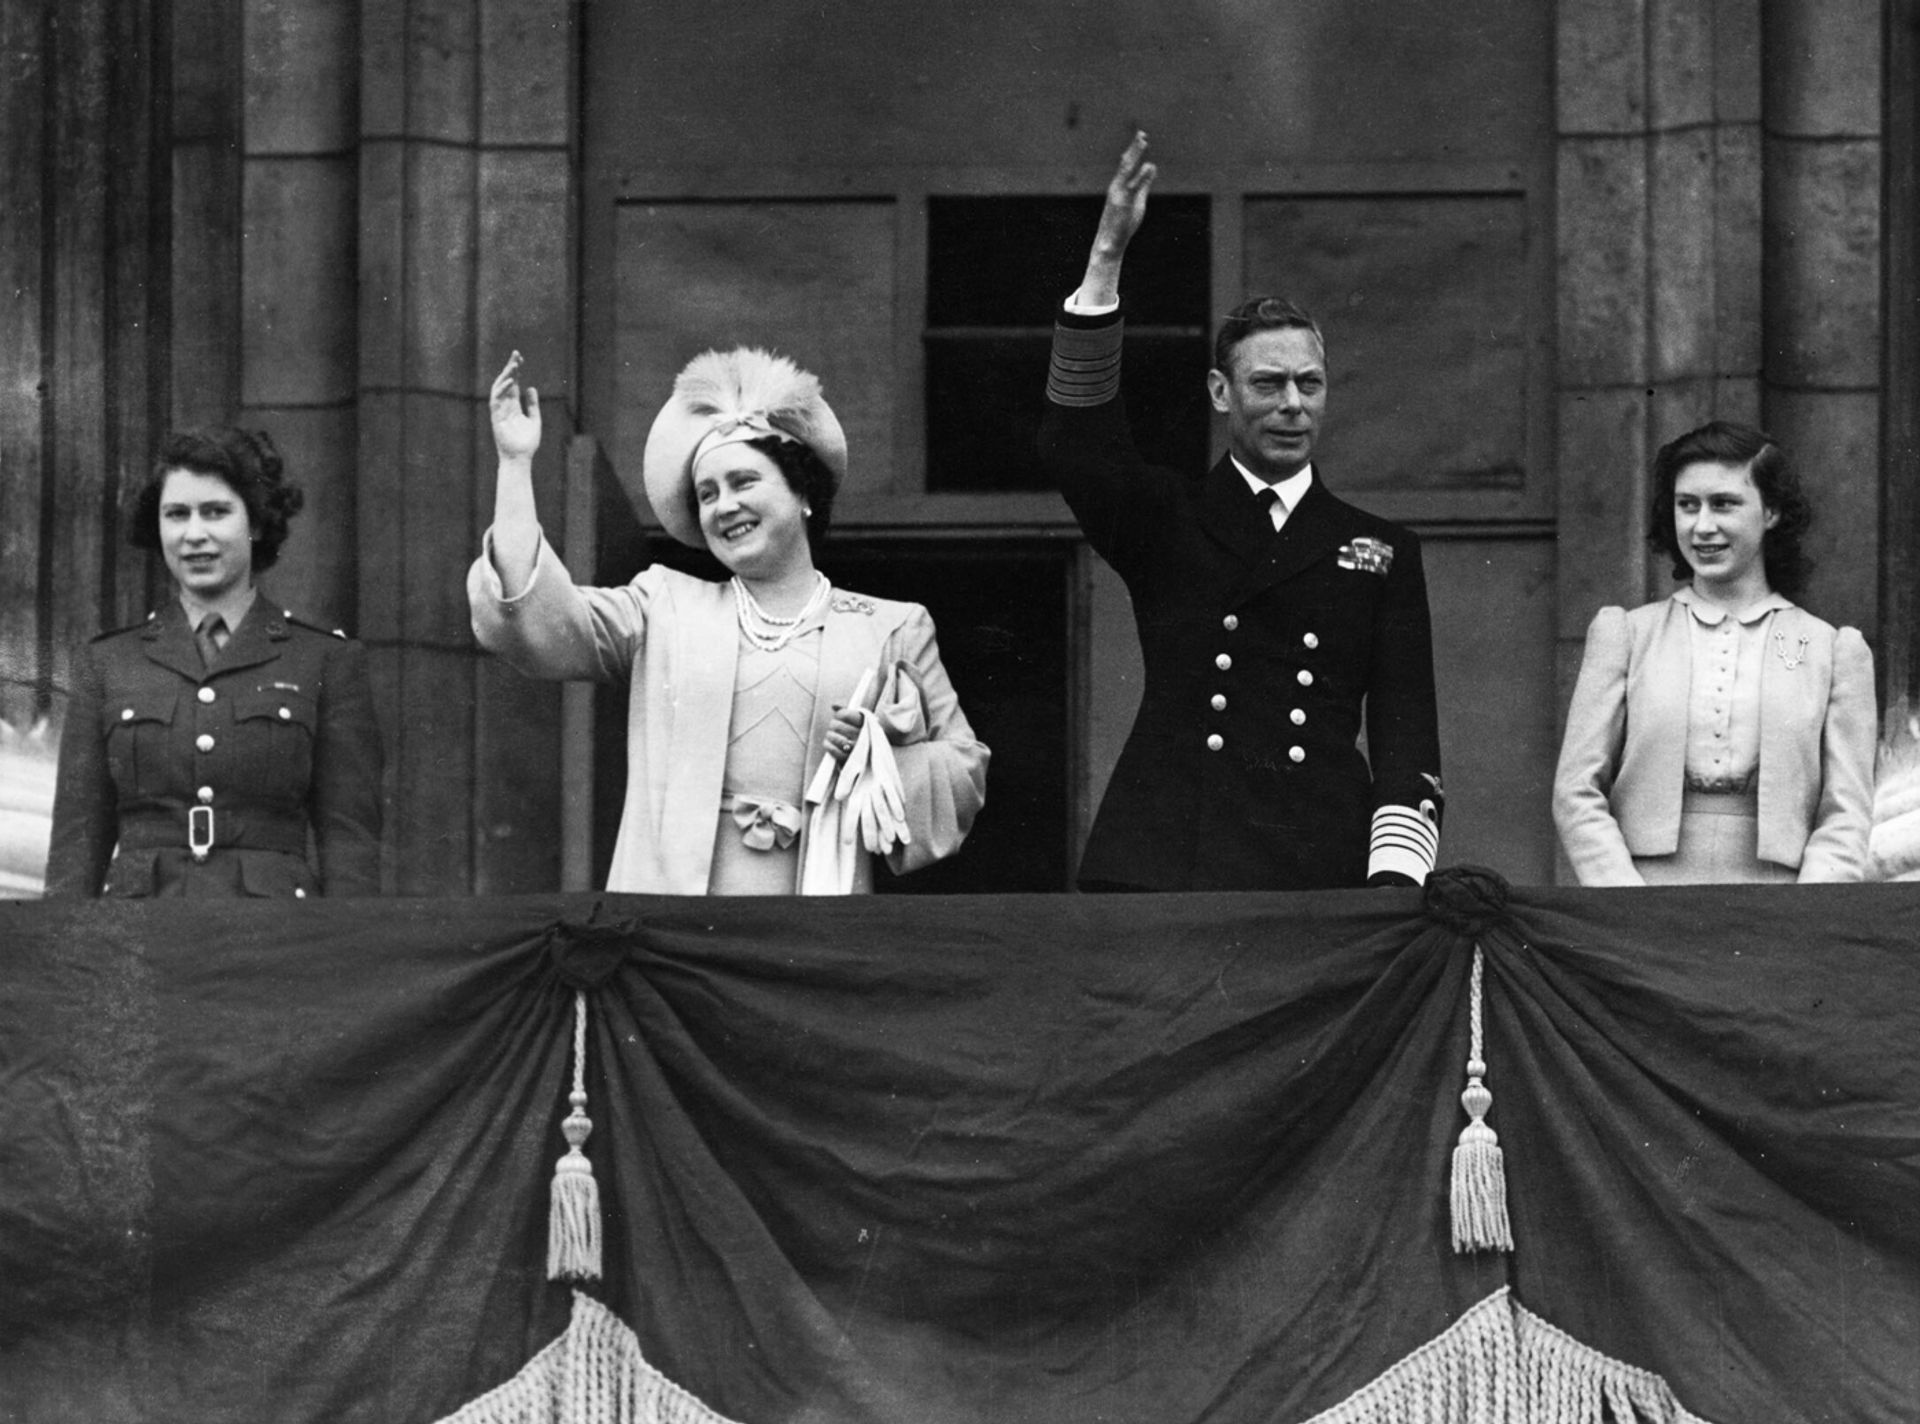 The 19-year-old Princess Elizabeth (left), with her parents King George VI and Queen Elizabeth and her sister Princess Margaret, as they greet the crowds from the balcony of Buckingham Palace, London, on VE Day, 8 May 1945 © ® Illustrated London News Ltd/Mary Evans—www.agefotostock.com

